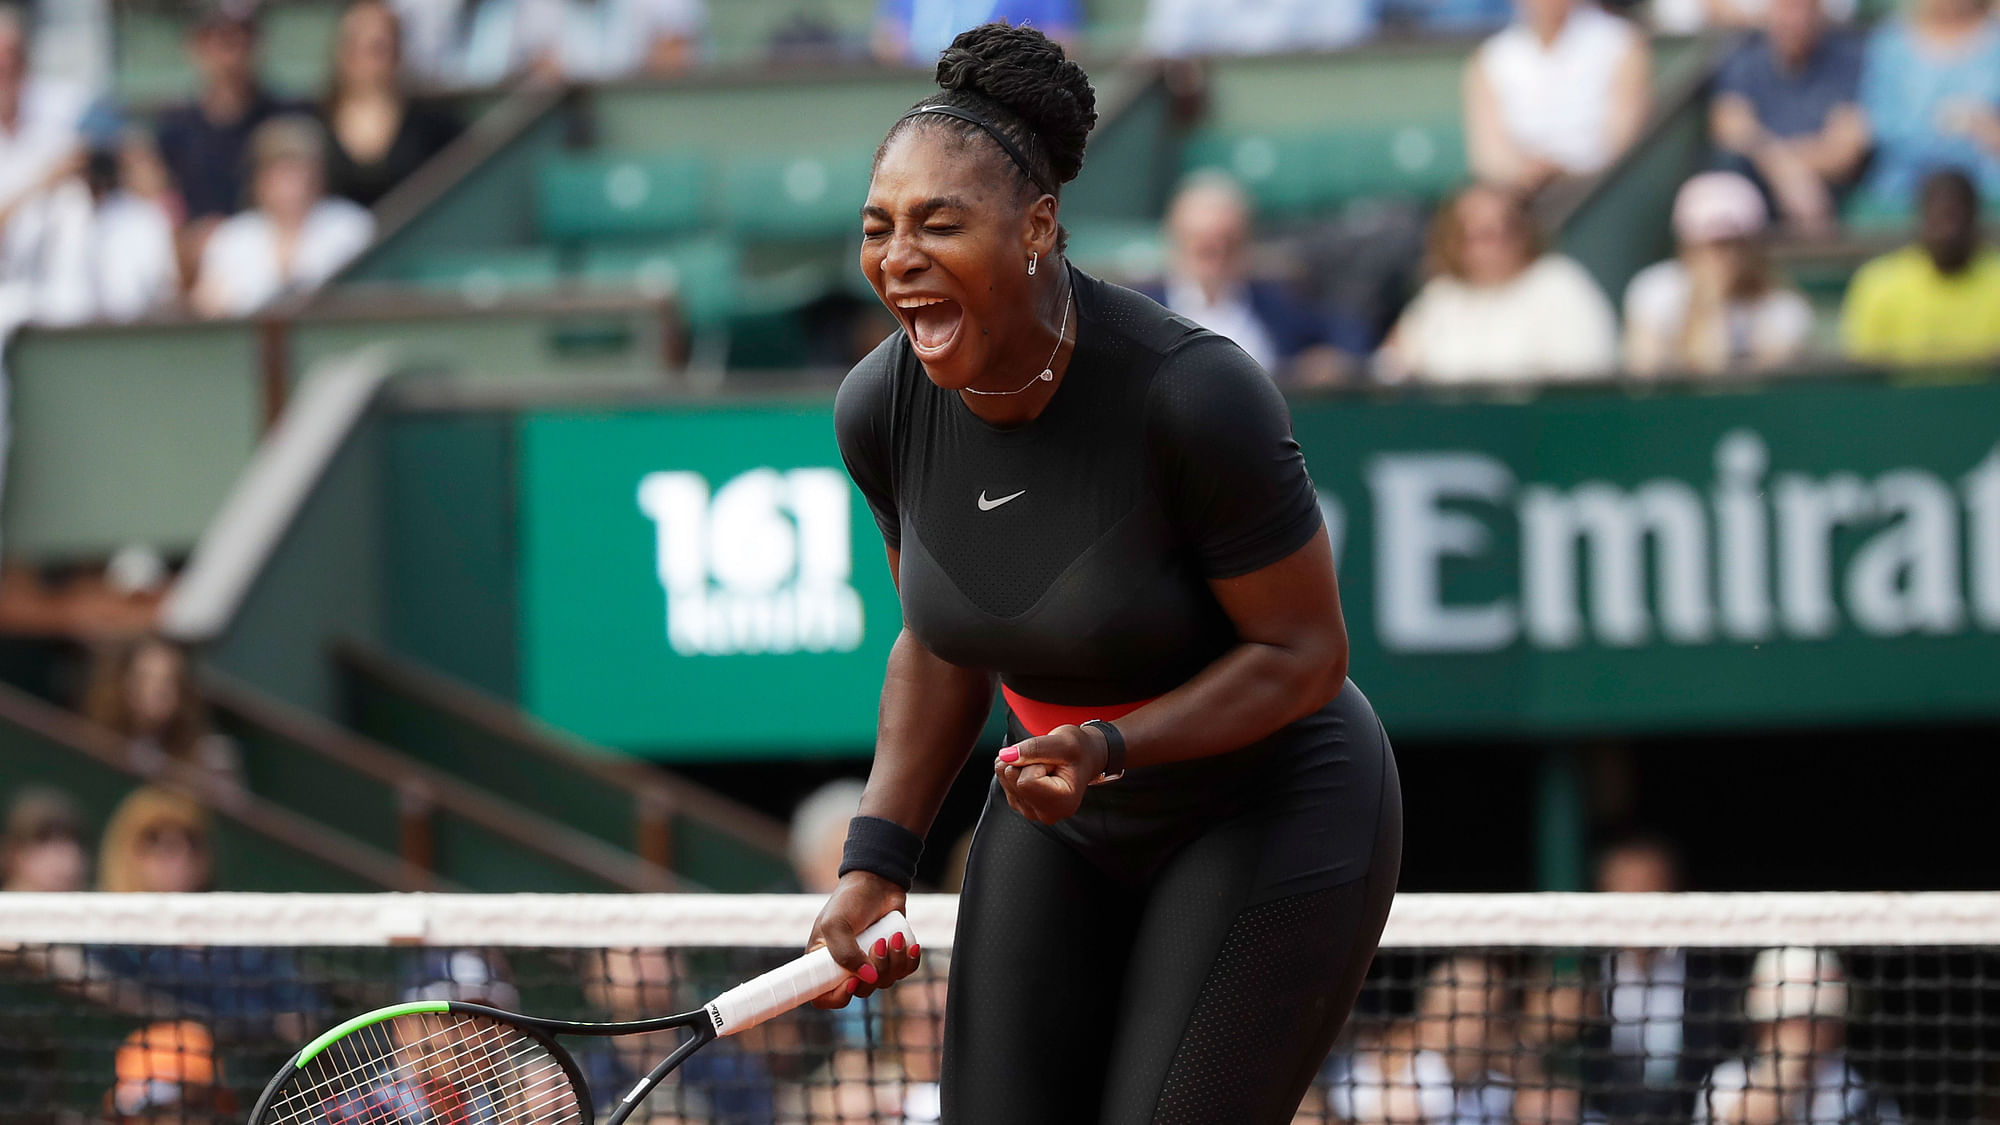 Serena Williams of the US celebrates winning her first round match of the French Open 2018.